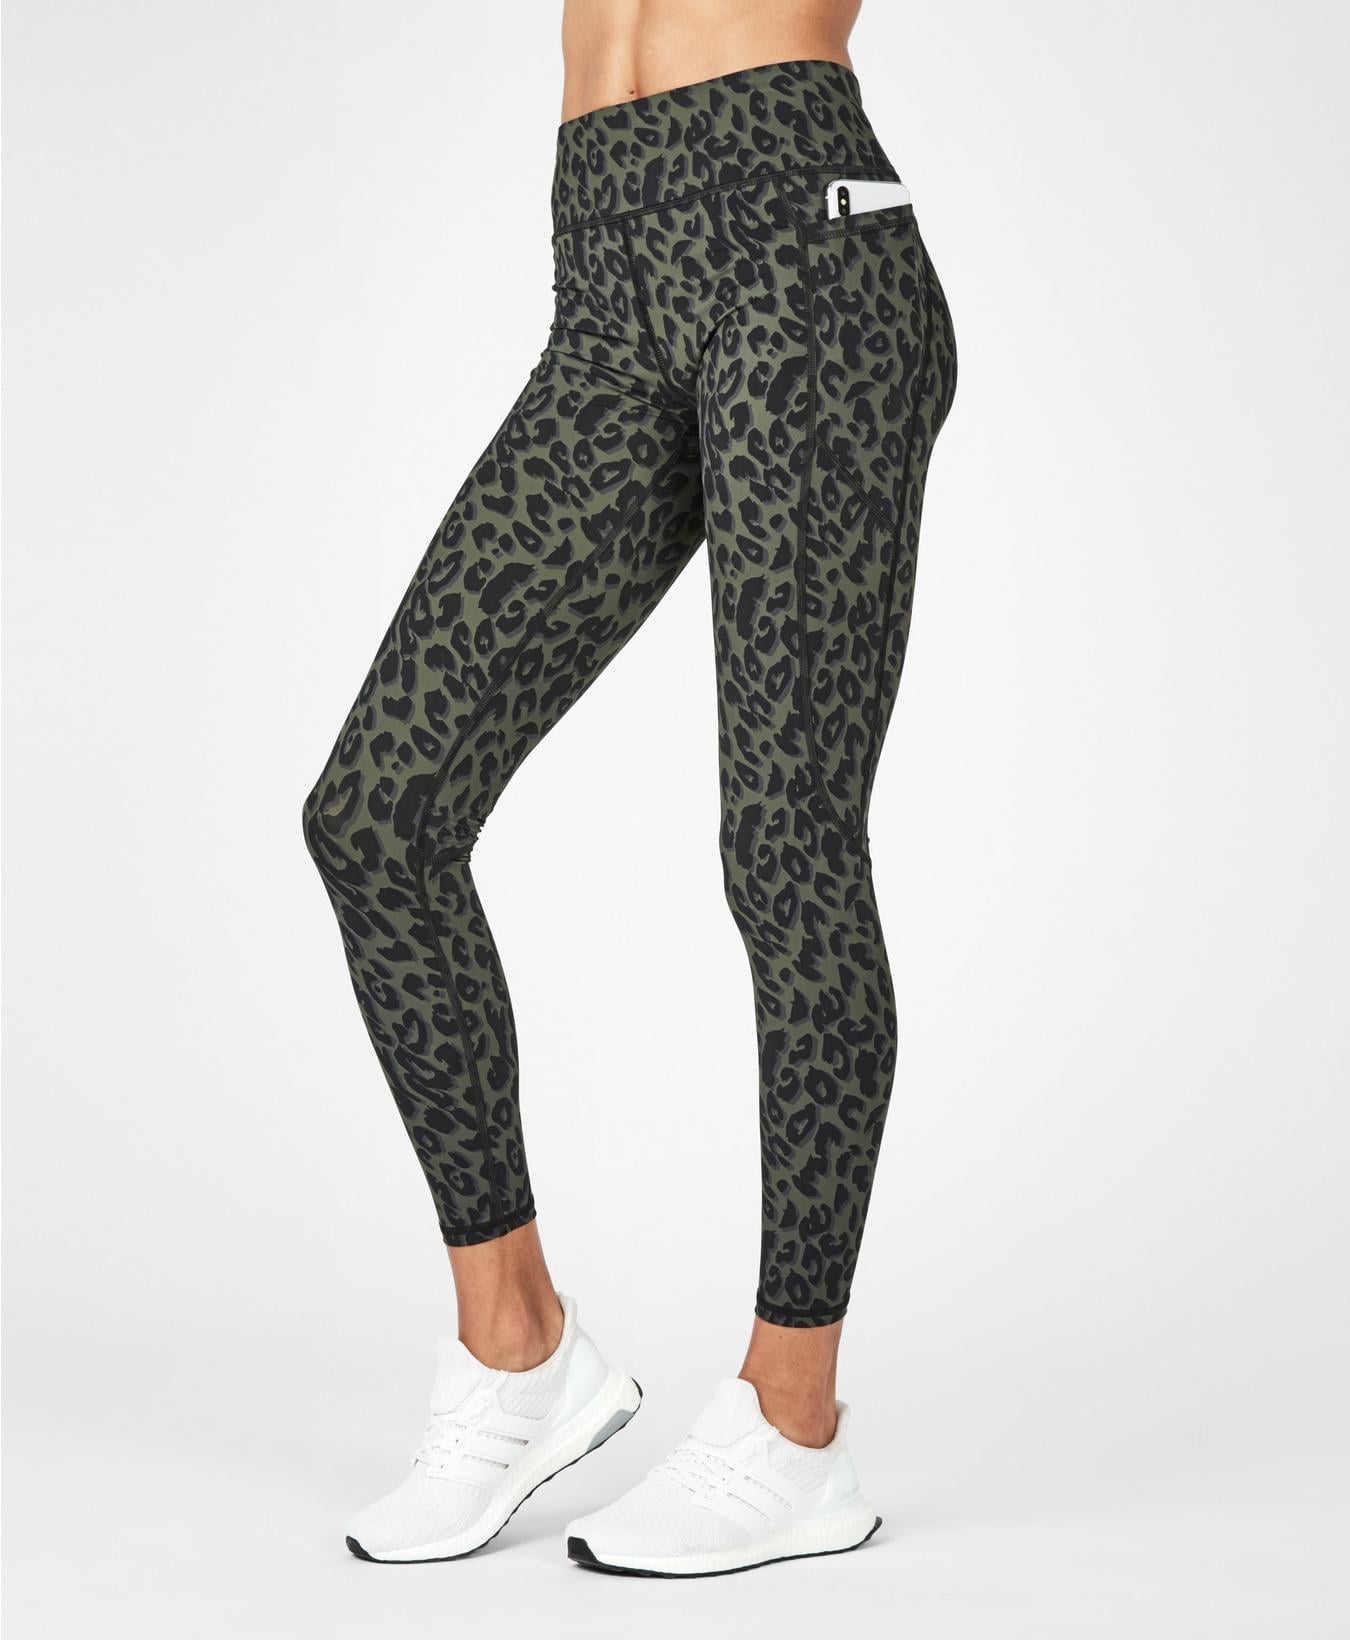 Sweaty Betty Zero Gravity High-Waisted Running Leggings, Unwrap Our  POPSUGAR Editors' Gift Guide! Shop 85 Presents For Everyone in Your Life